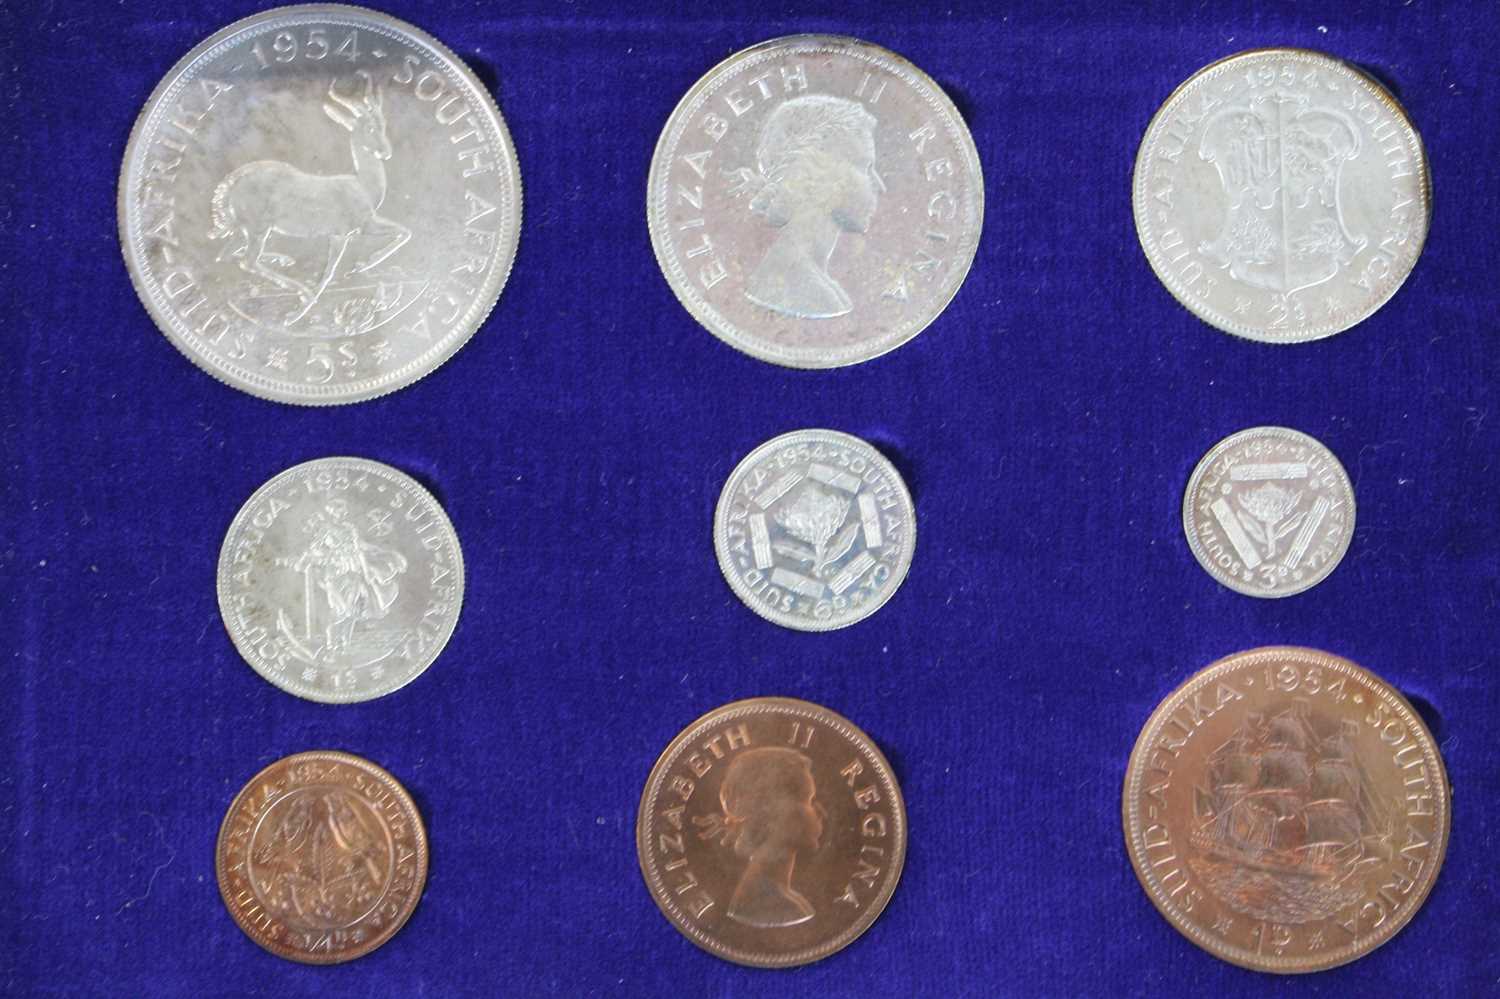 South Africa, 1954 nine coin proof set, five shillings to quarter penny, in South Africa Mint fitted - Image 2 of 2